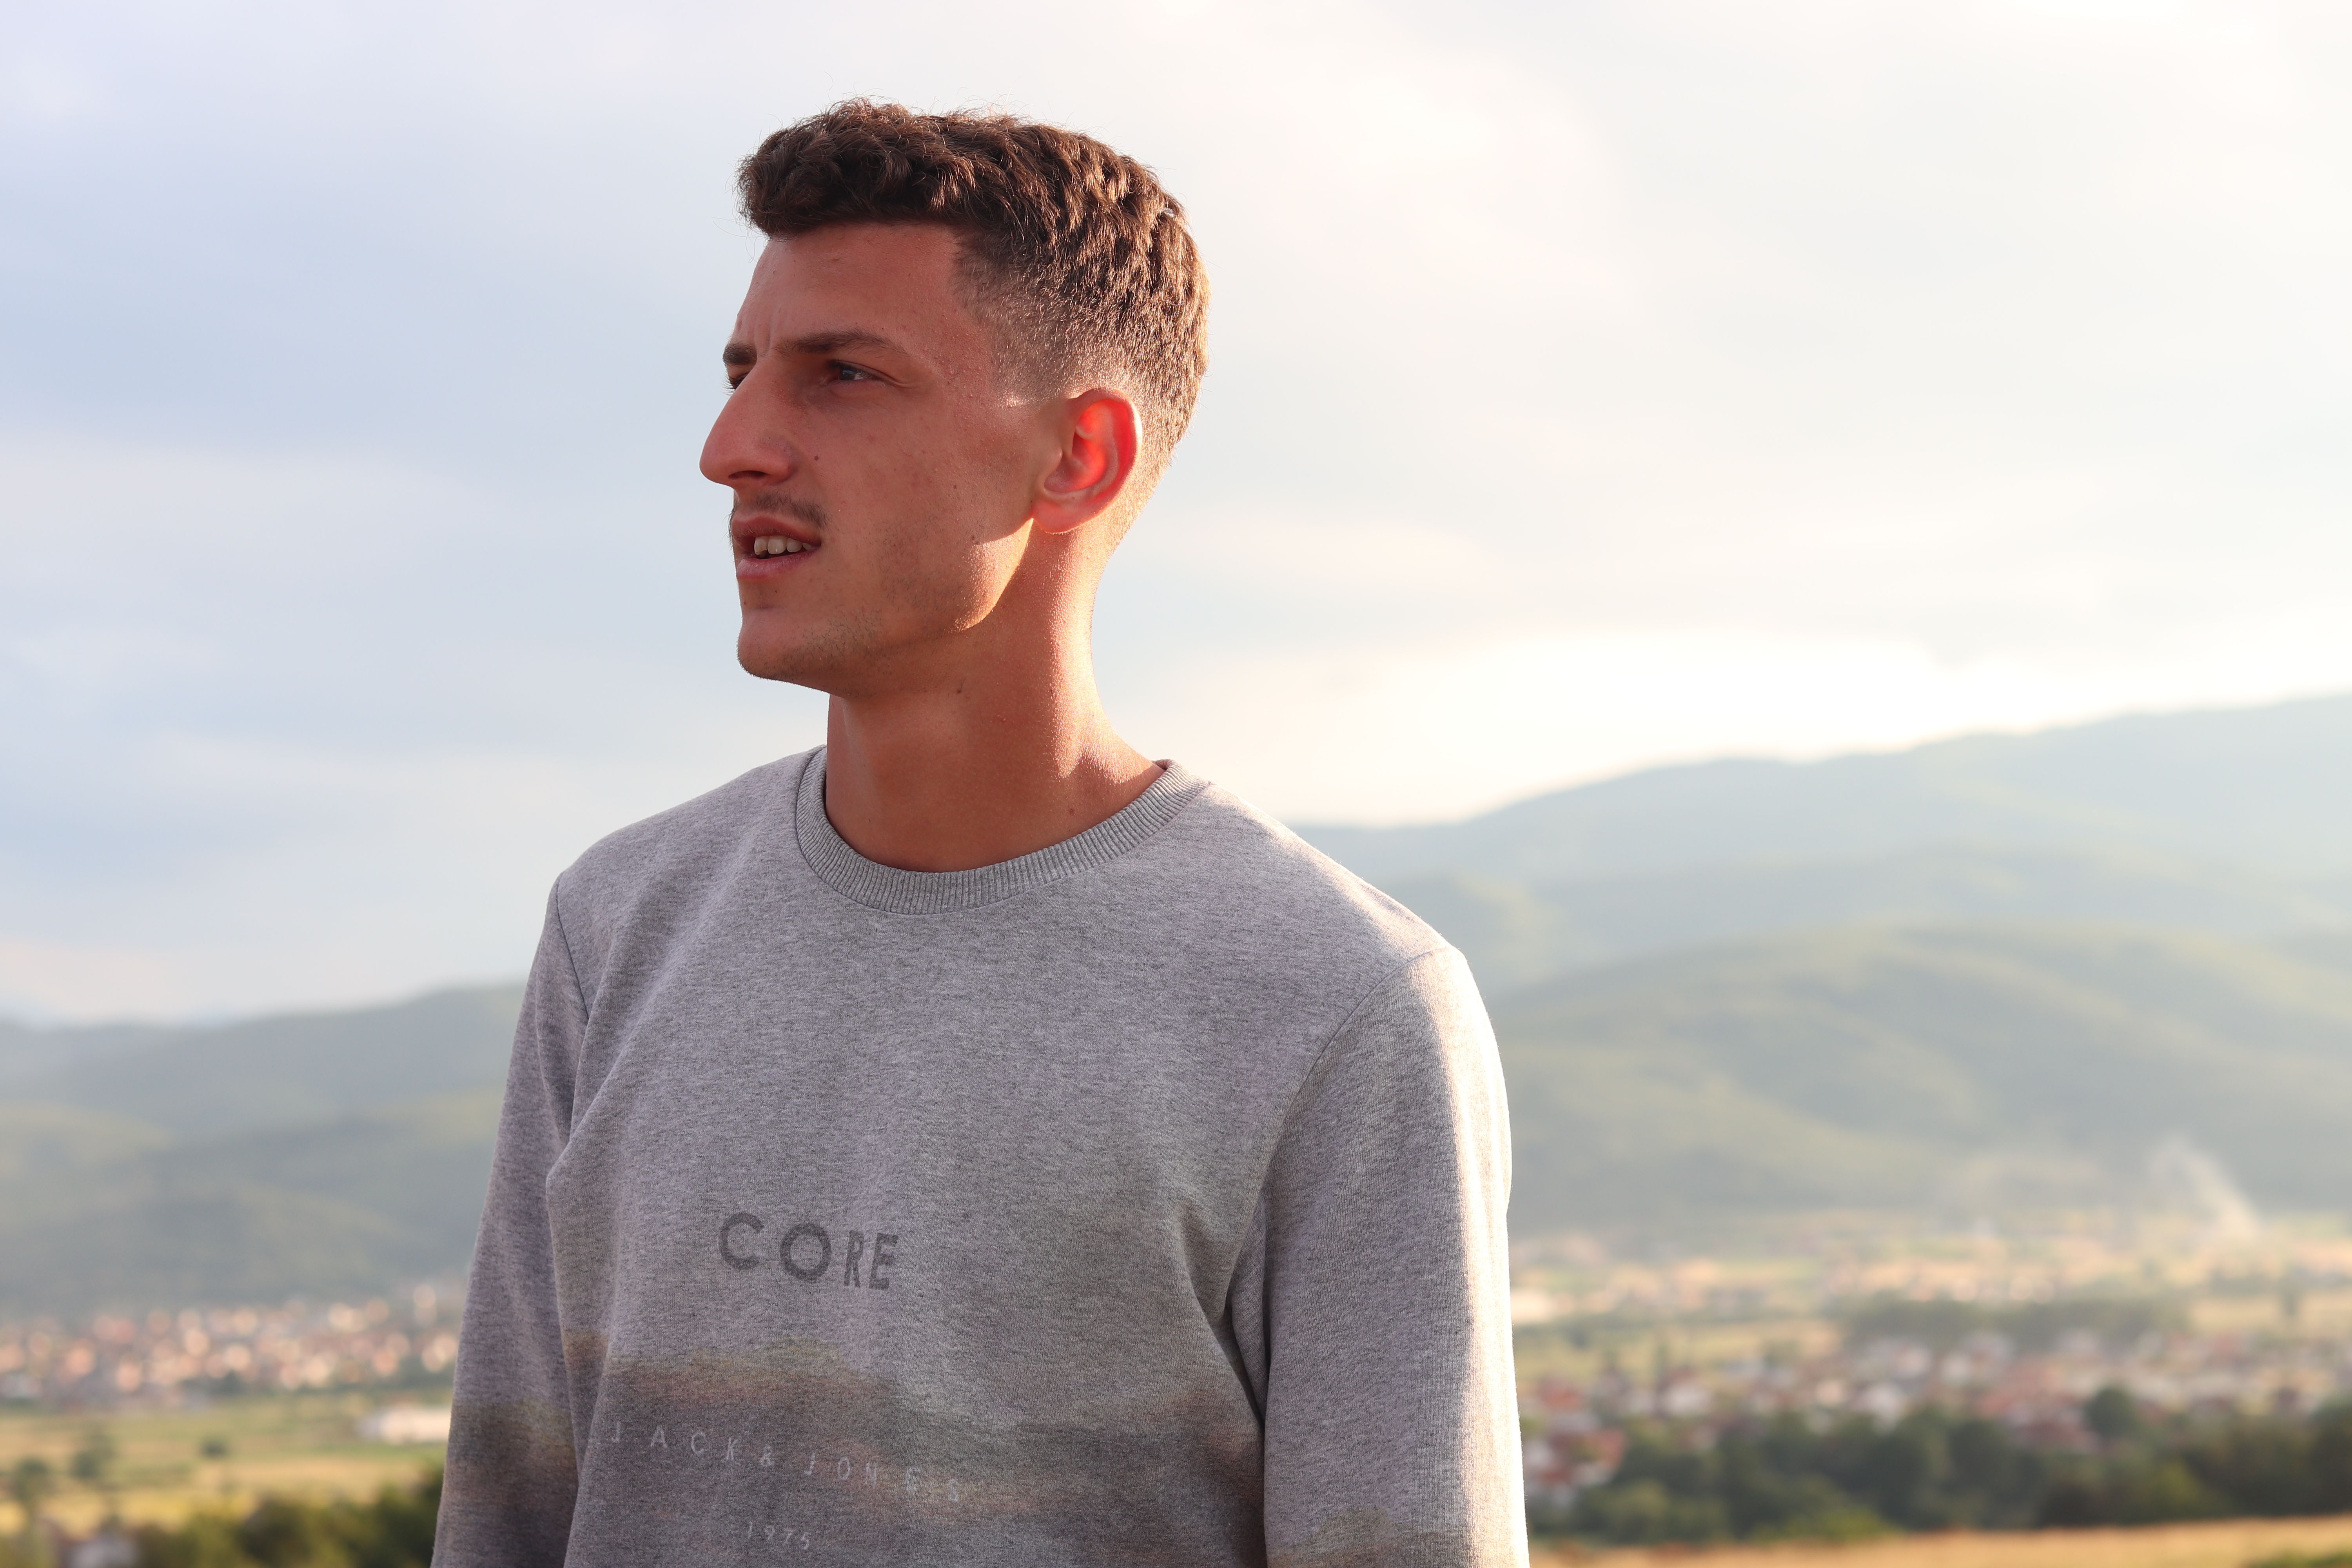 Albin Heta, 19, the cousin of Blerim Heta, poses in his small village called Varosh. Blerim left to fight for jihad in Syria on August 7, 2013. On March 25, 2017, Blreim became one of two Kosovo-Albanian suicide bombers, killing himself and 52 Iraqis in a bombing in Baghdad. “He was polite and nice, but in three months, he changed completely,” said Albin. Image by AJ Naddaff. Kosovo, 2018.